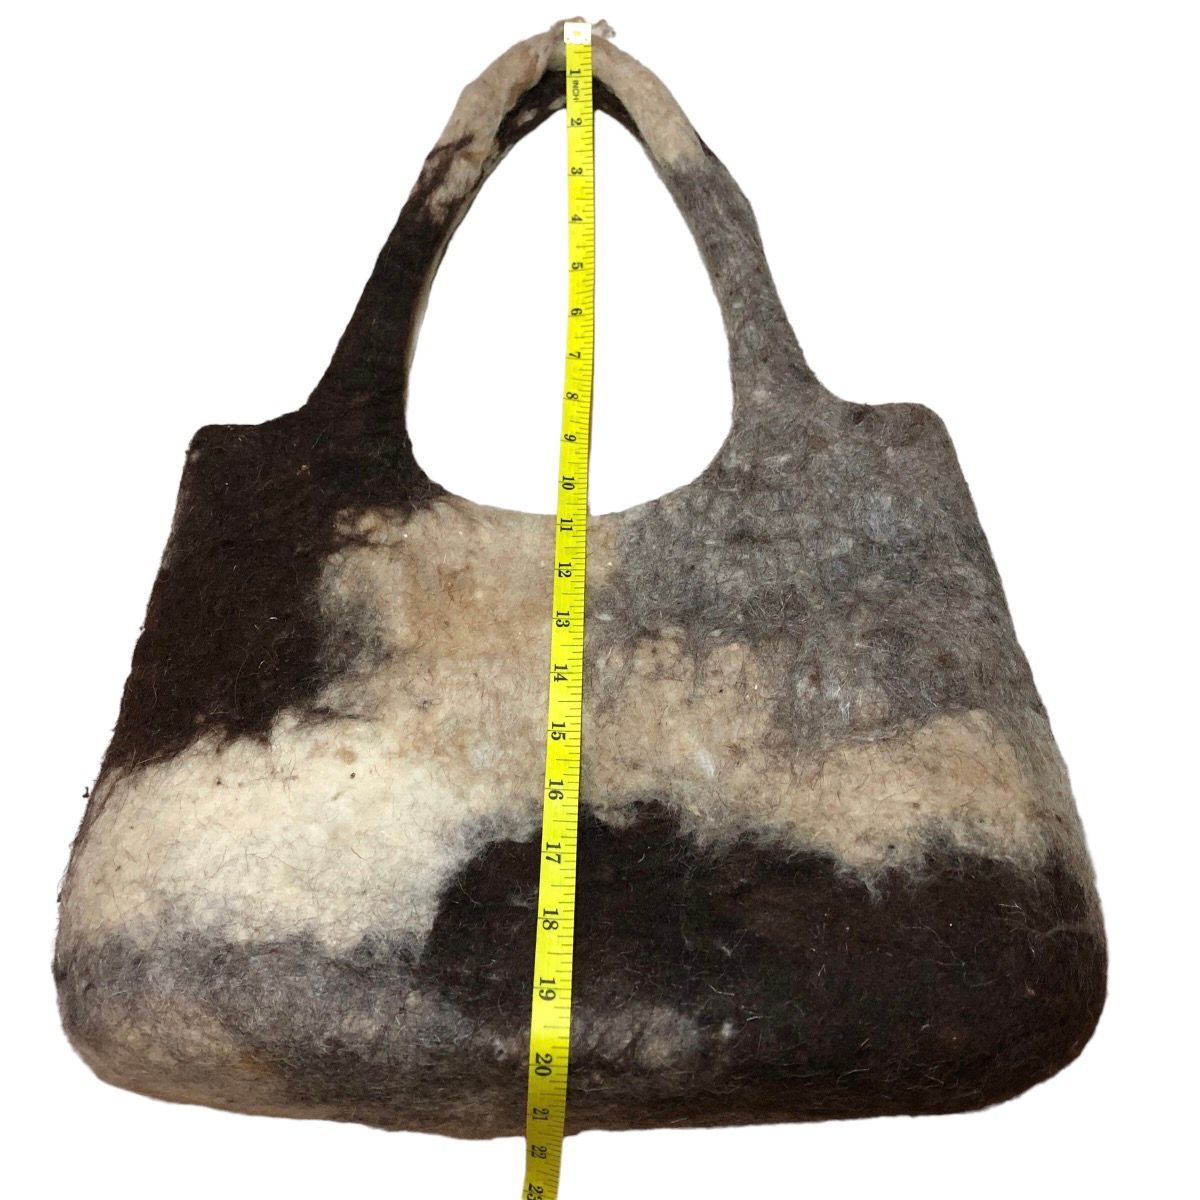 Japanese Brand - Pual Ce Cin Hairy Woolen Tote Bag - 3